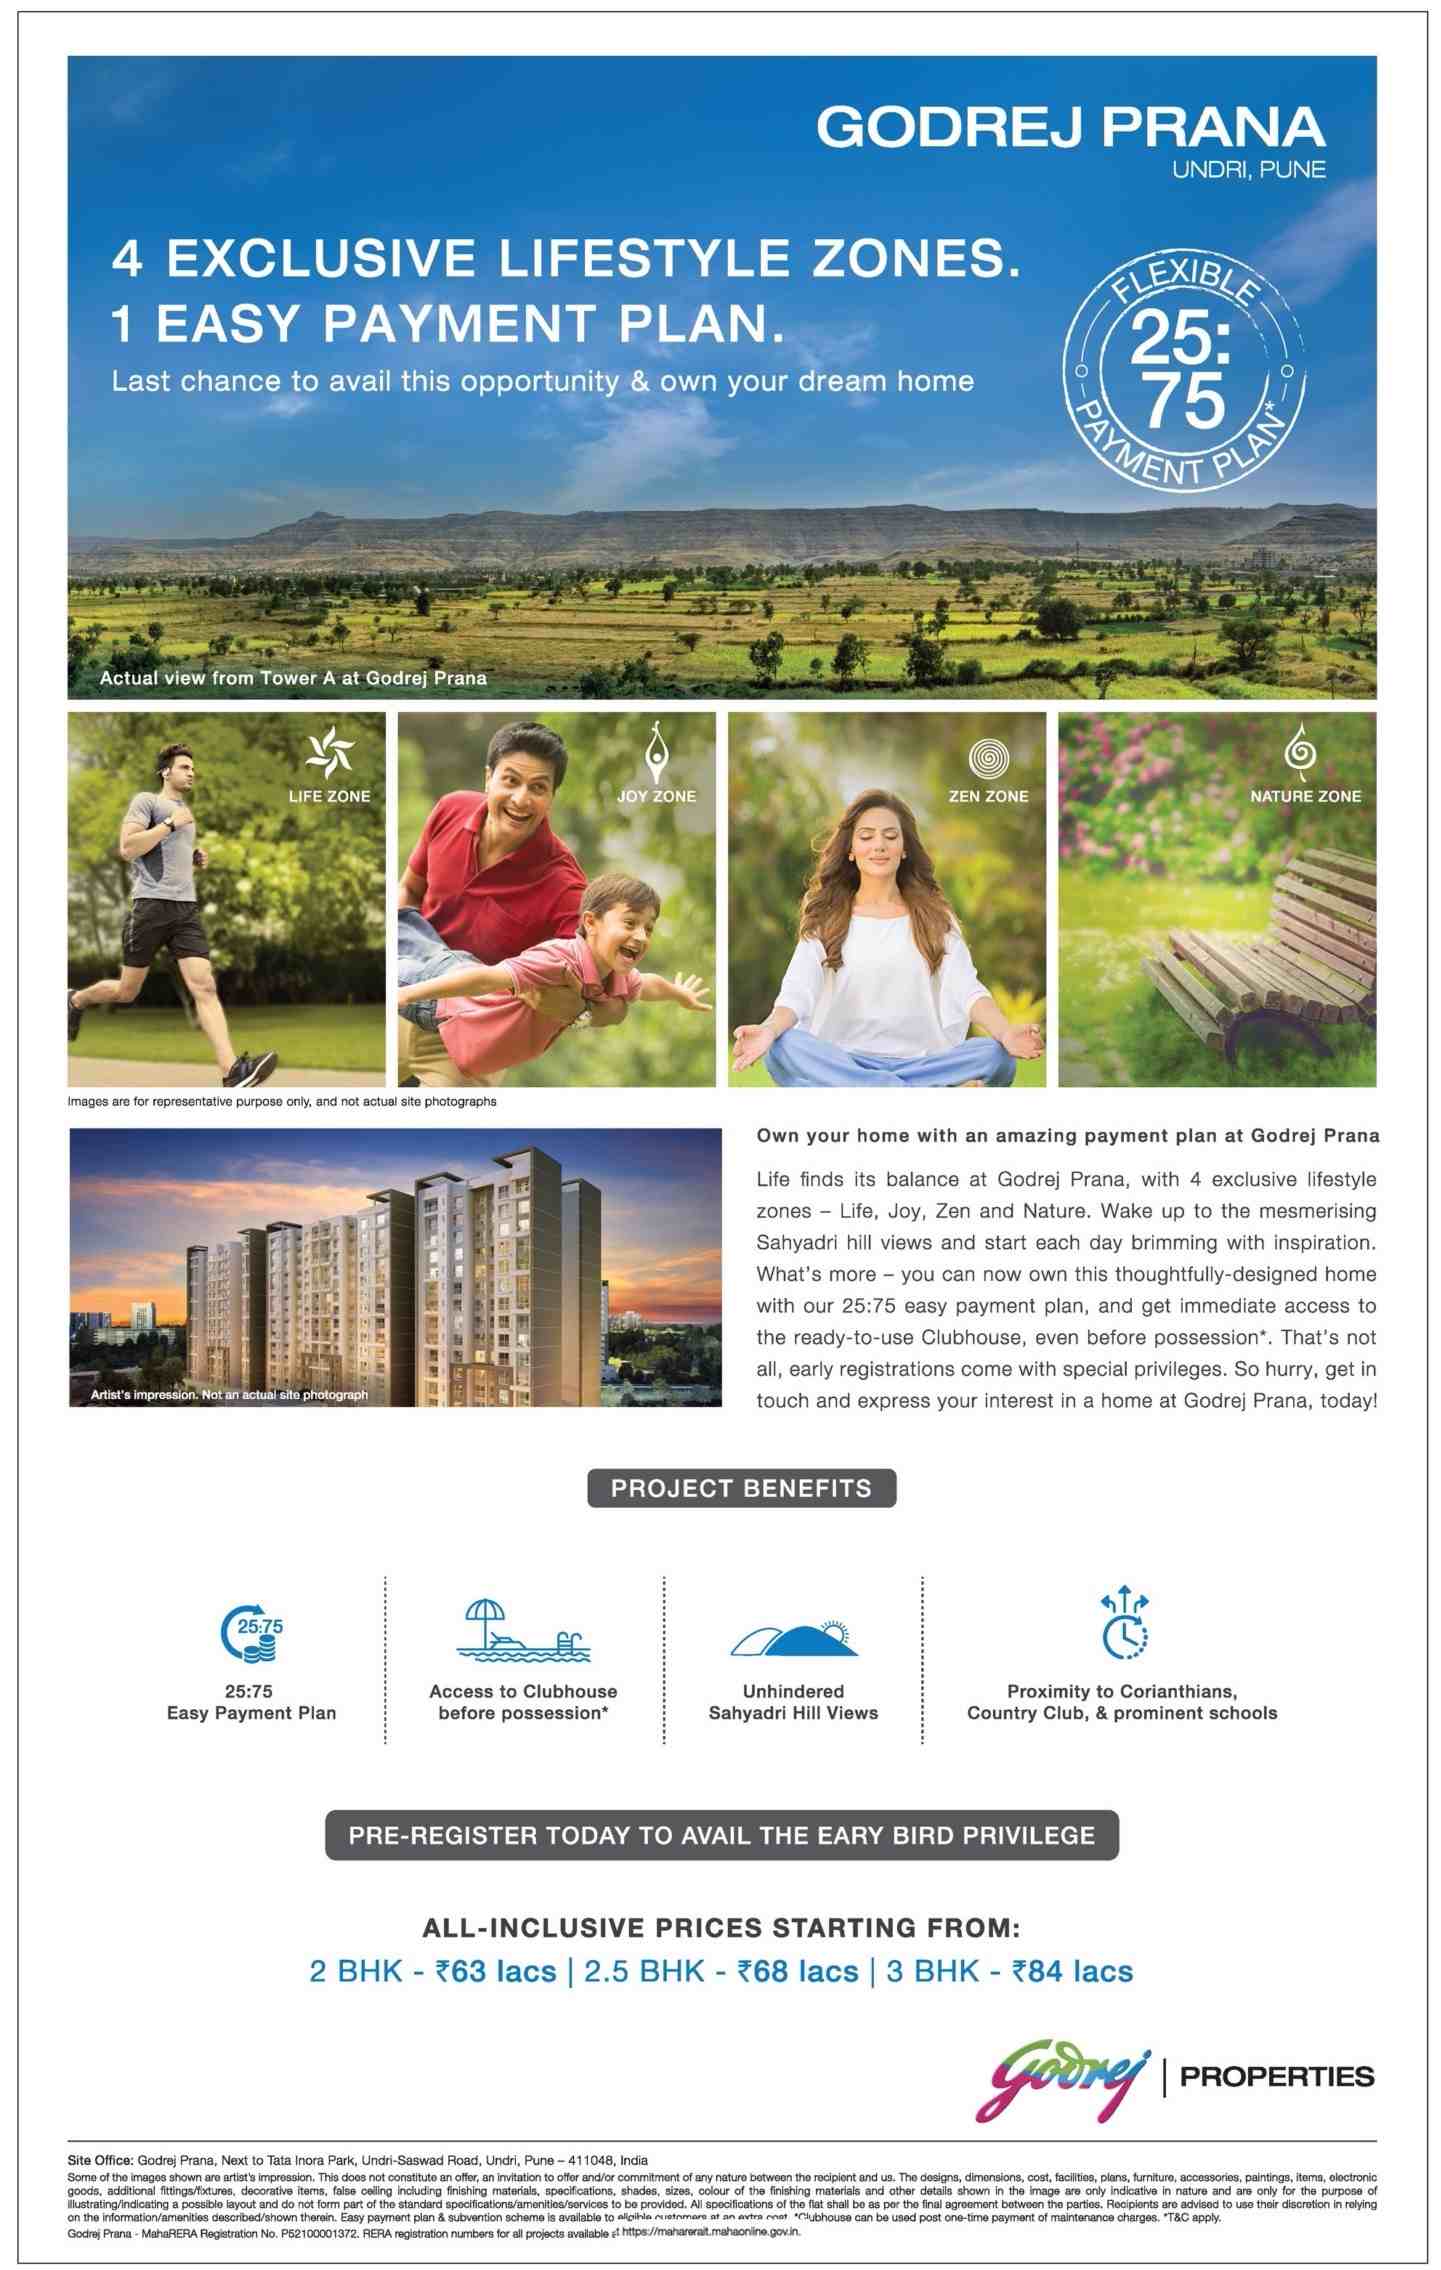 Own your home with an amazing payment plan at Godrej Prana in Pune